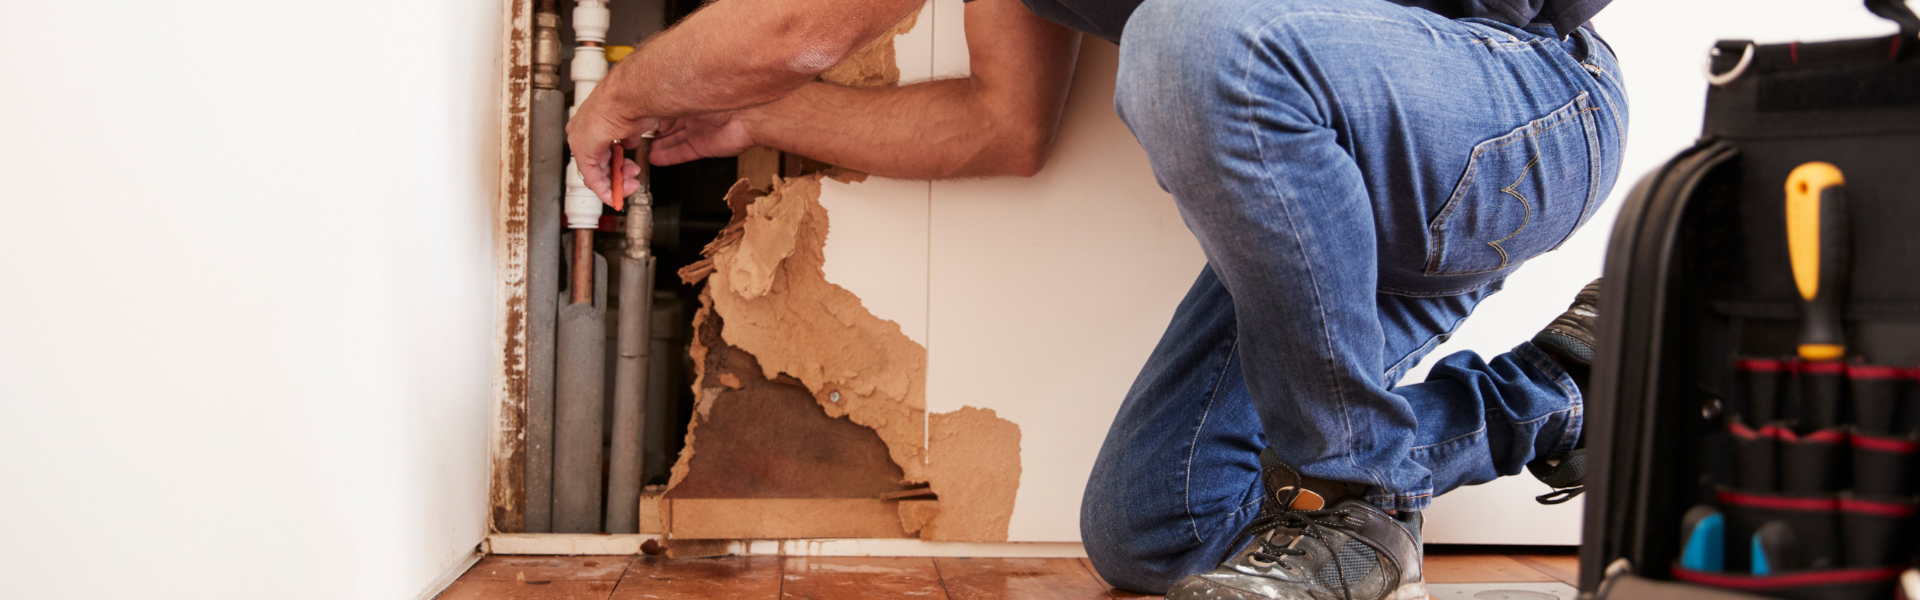 Water damage in your vacation home